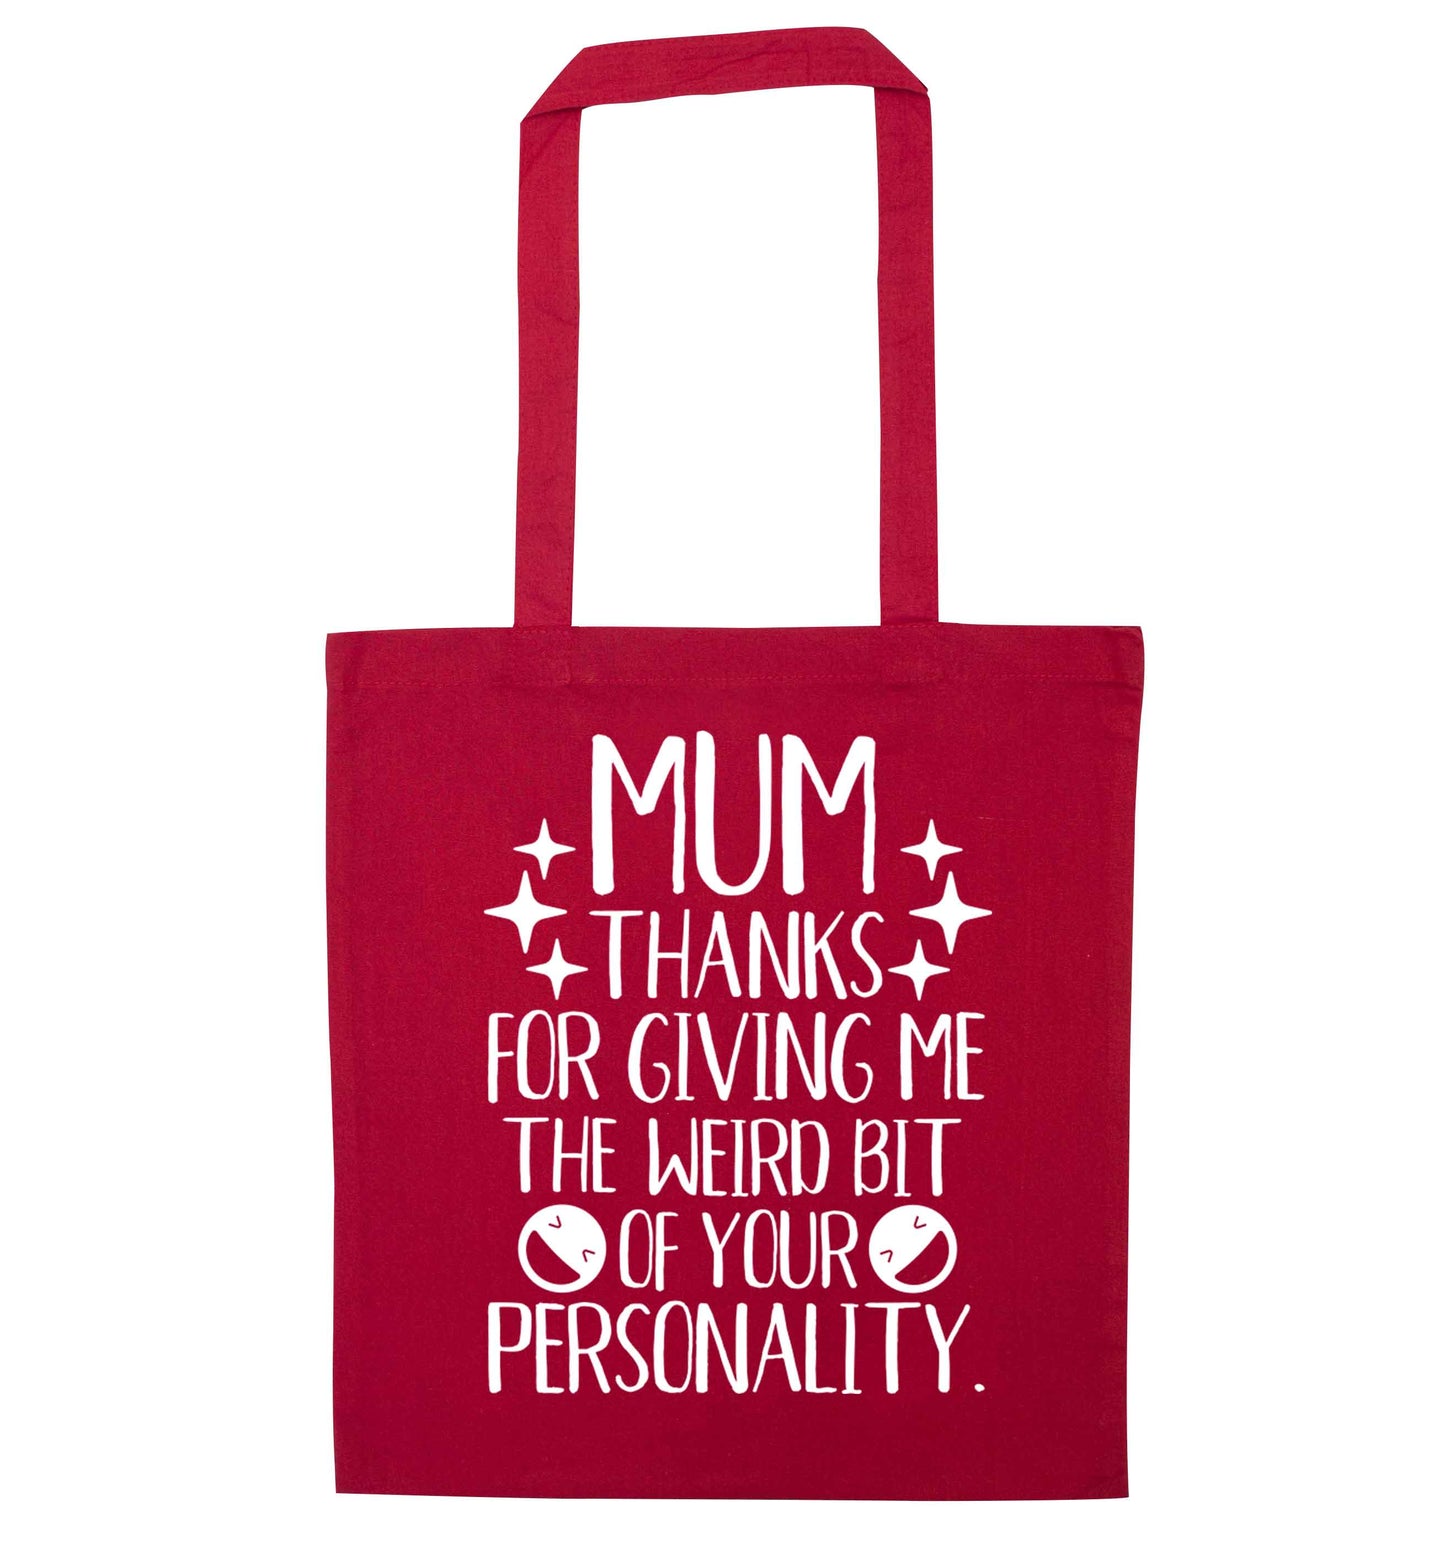 Mum, I love you more than halloumi and if you know me at all you know how deep that is red tote bag